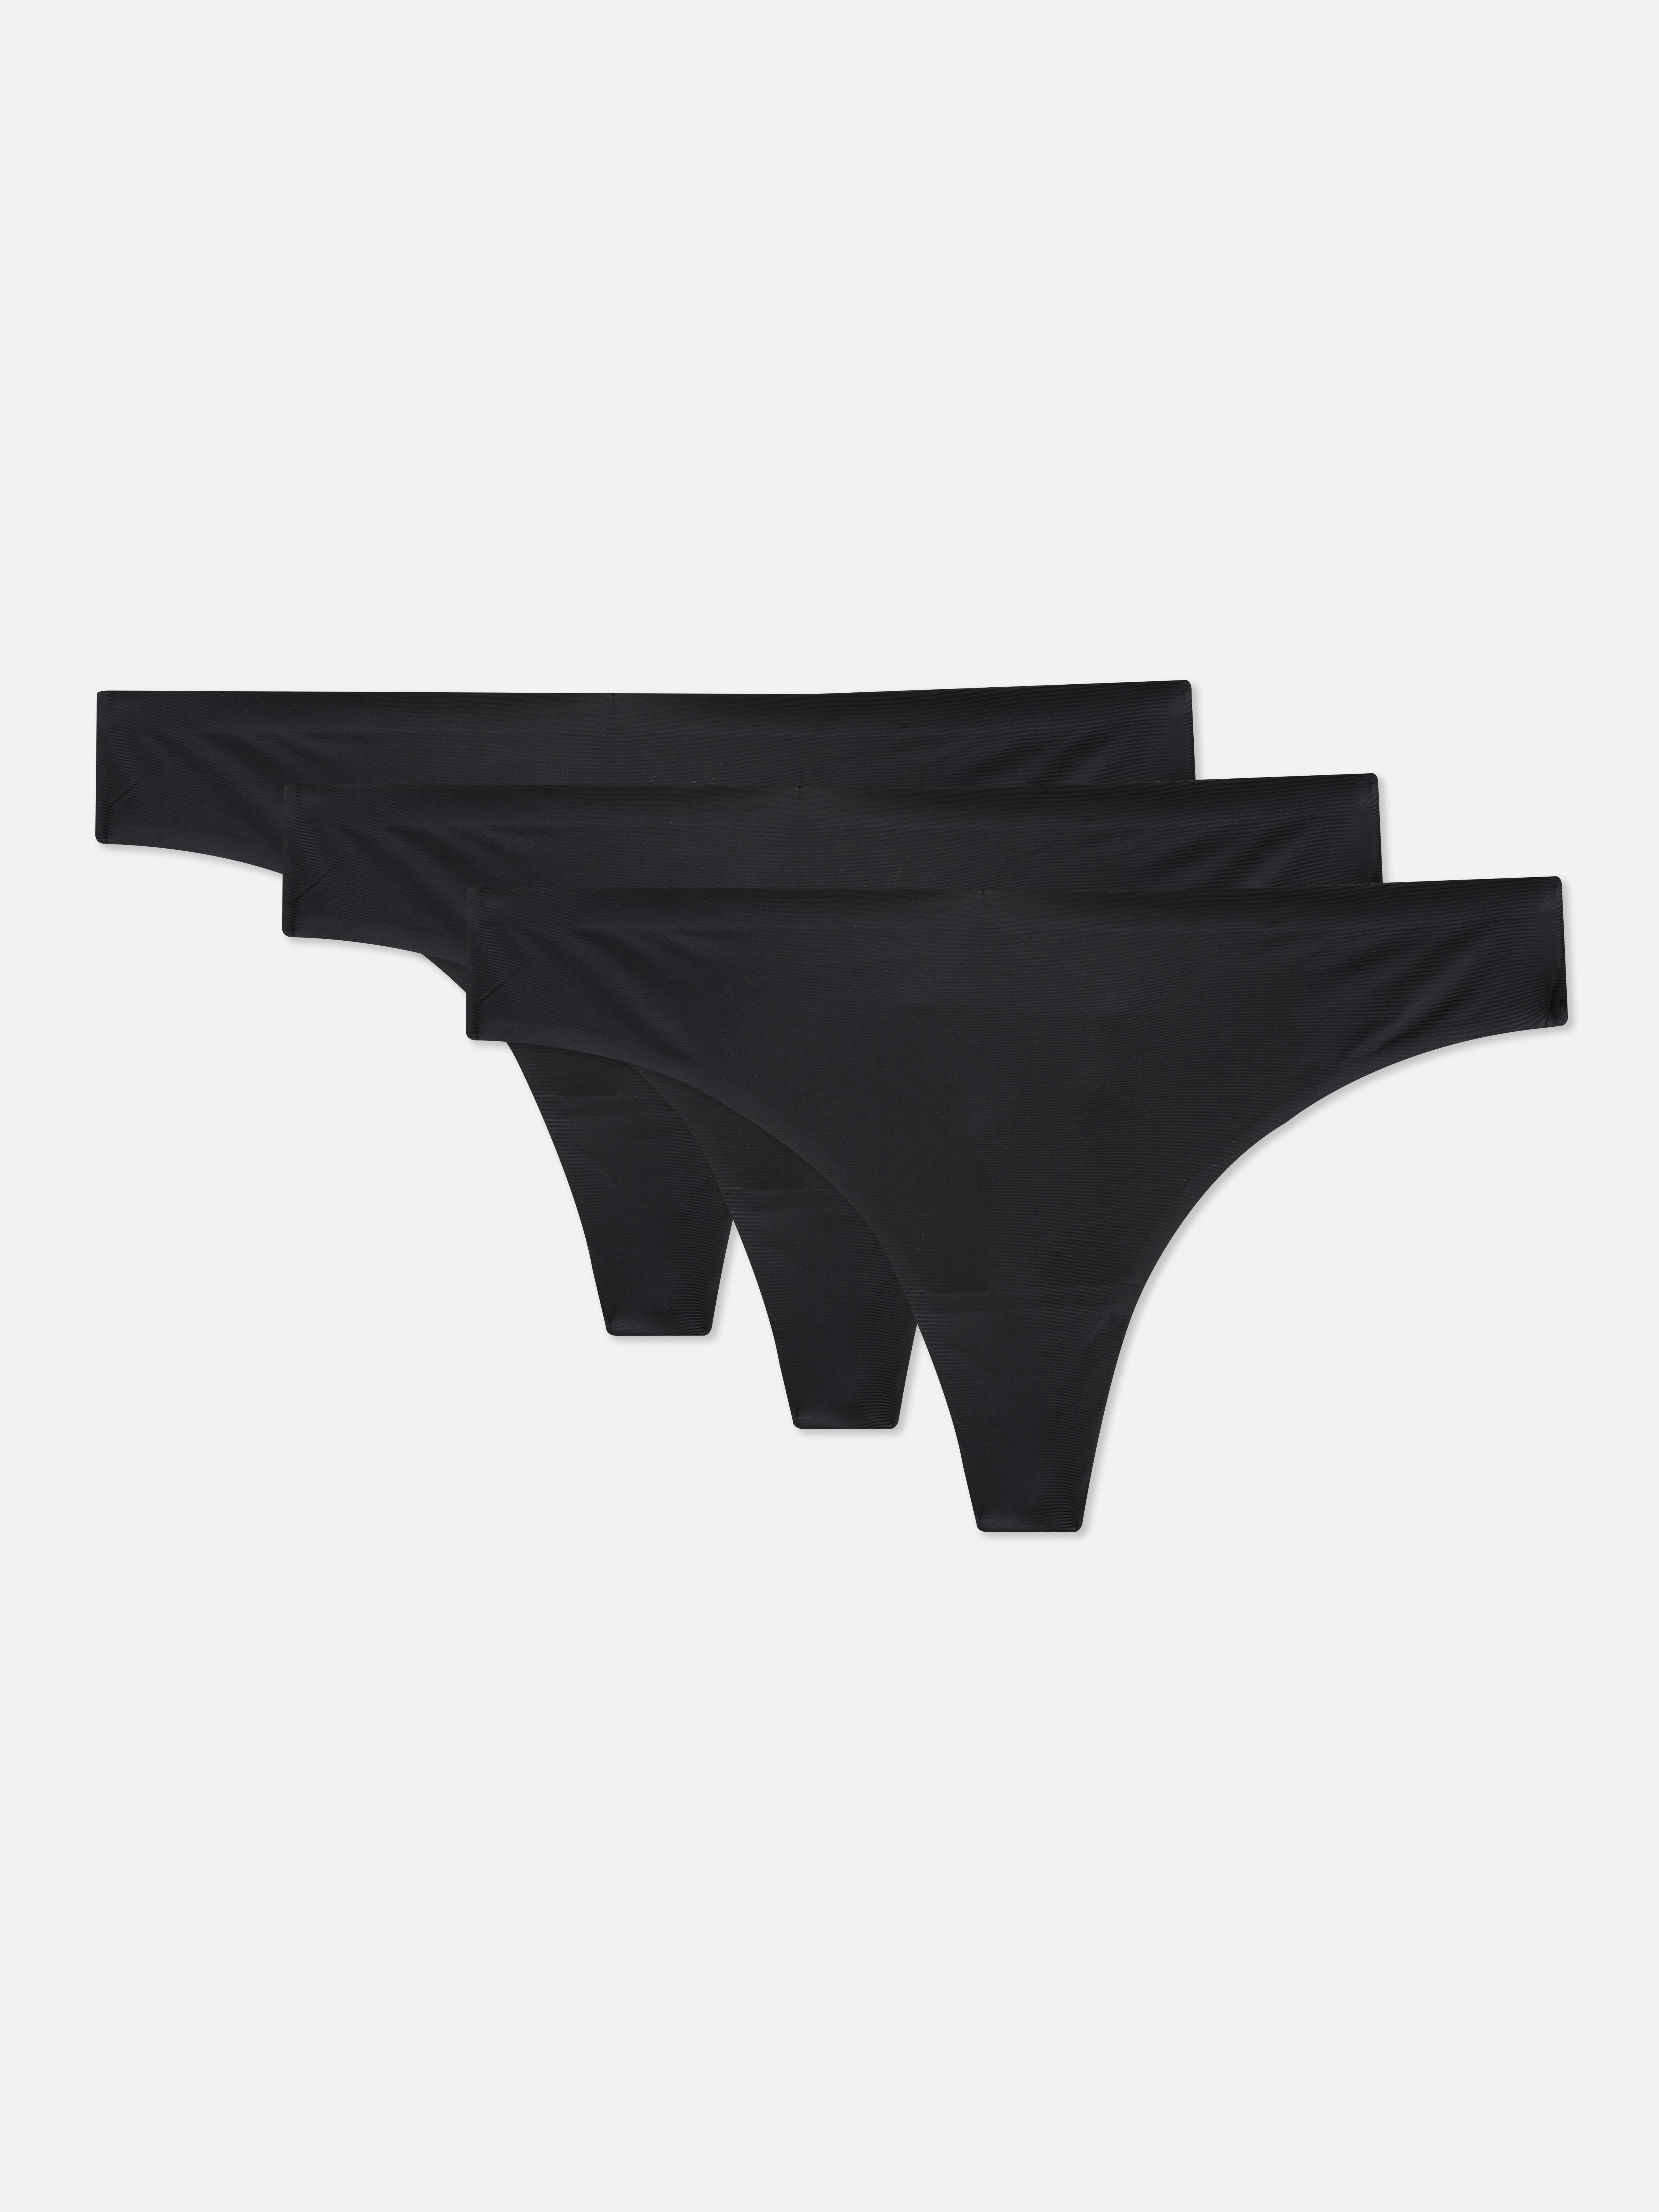 Primark - P-p-pick up a pant!! Primark have frilly thongs, lace